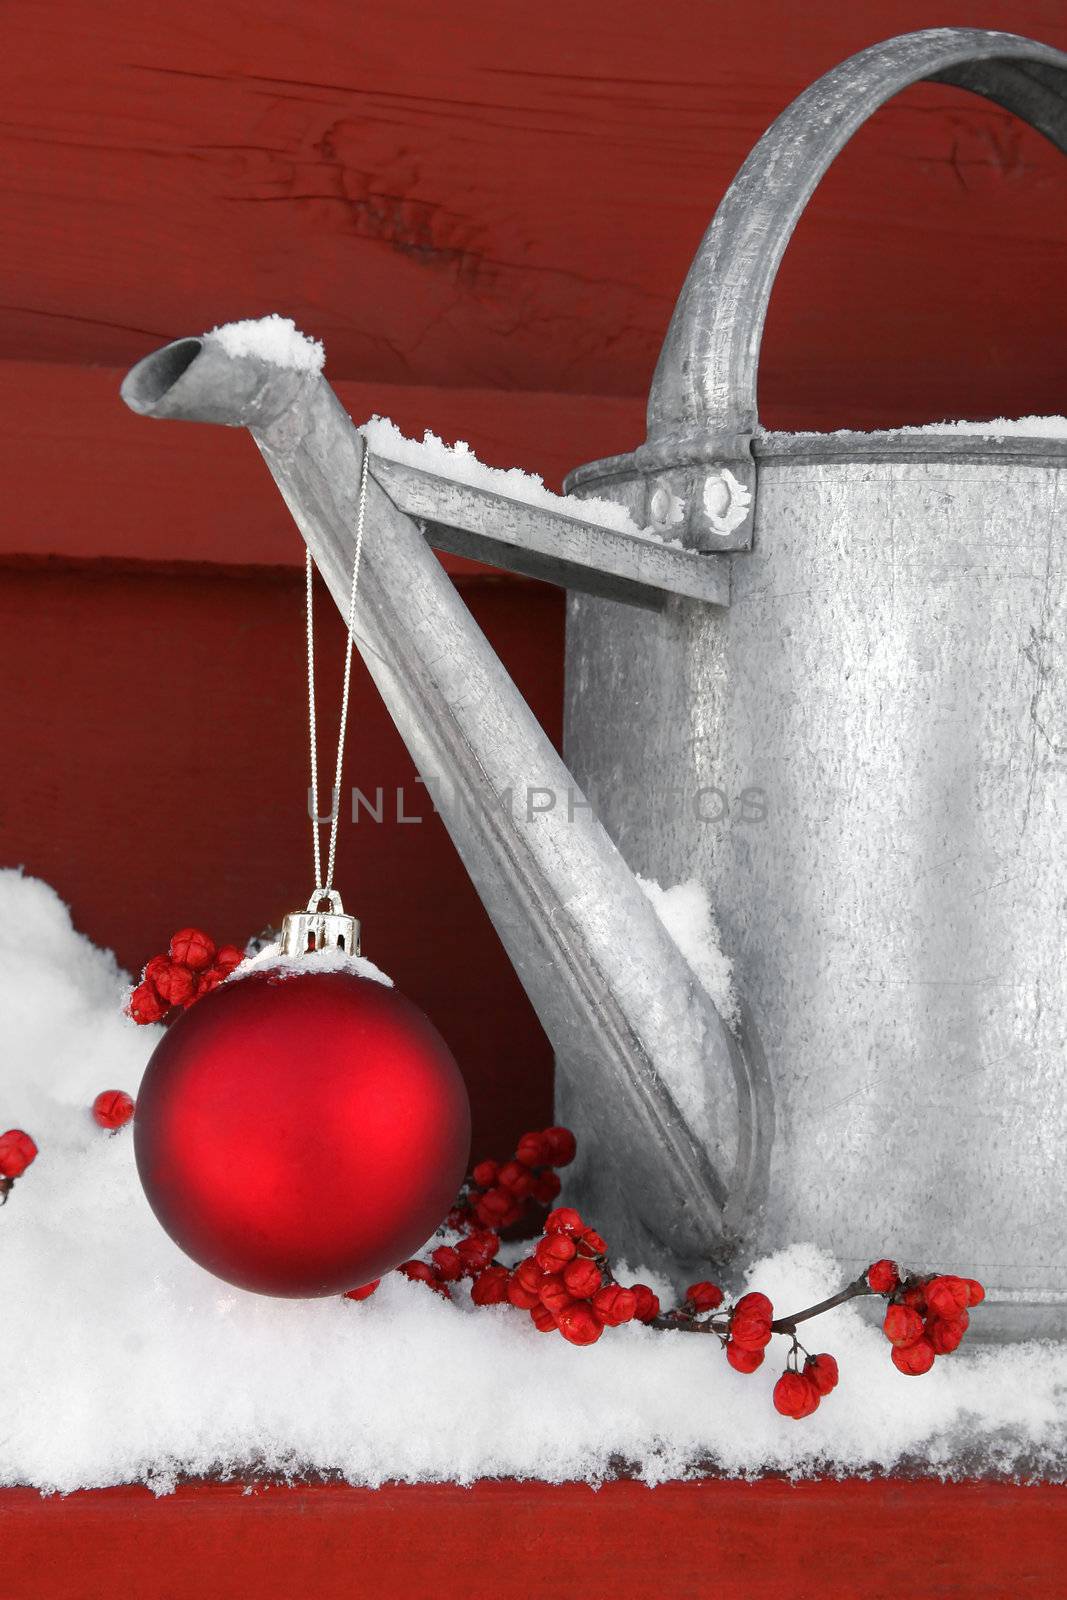 Red Christmas ball hanging on watering can in the snow